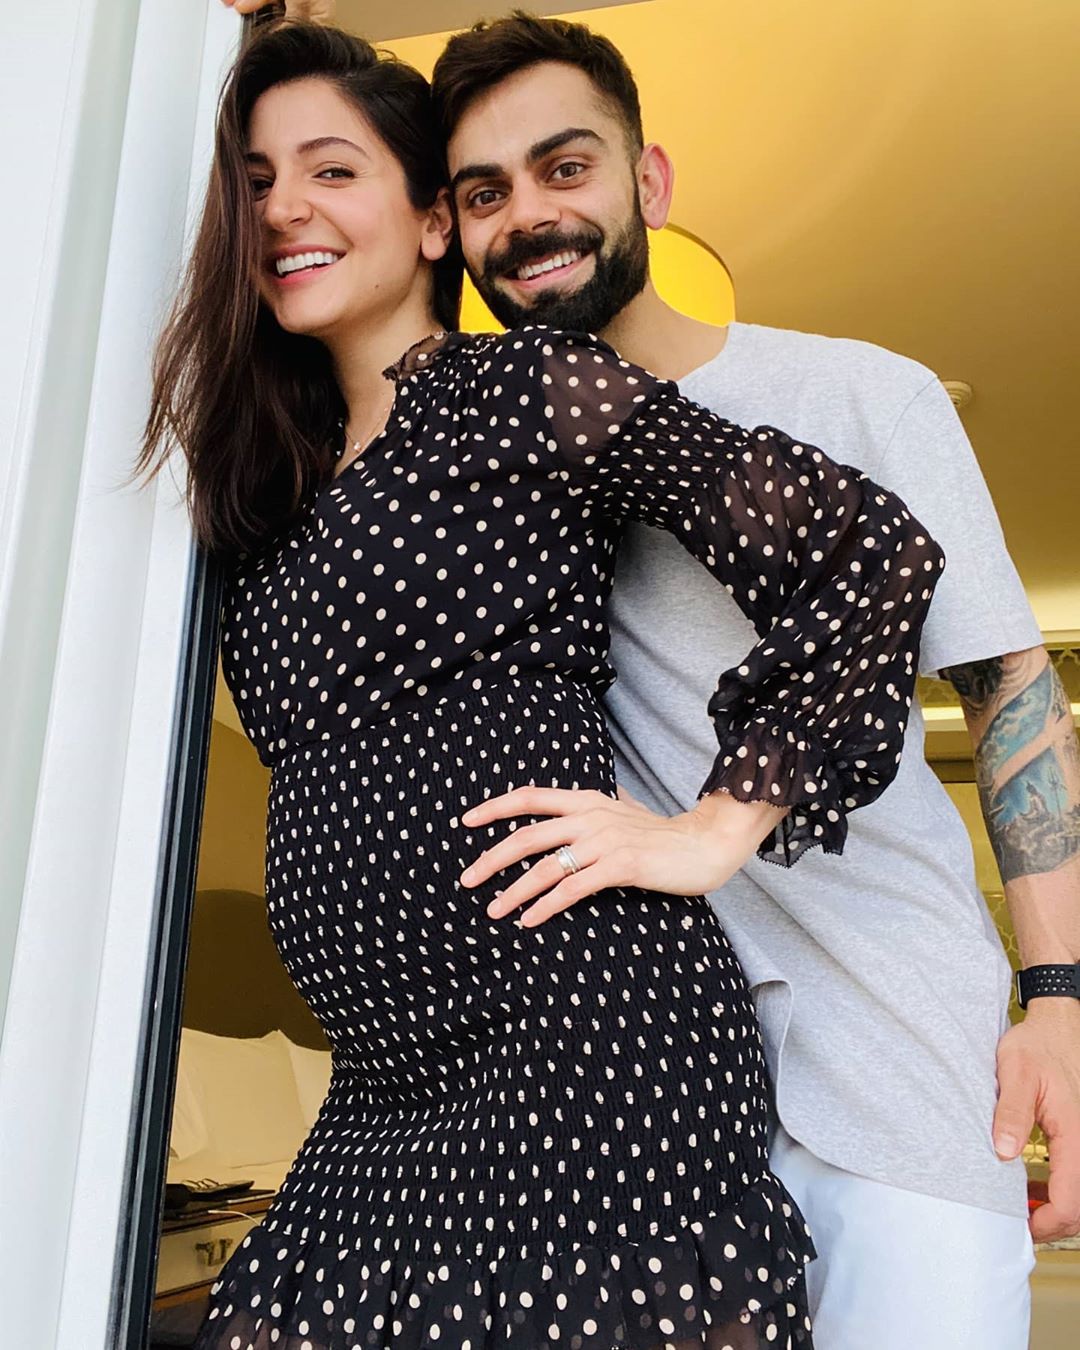 Virat Anushka announced the arrival of baby in 2021